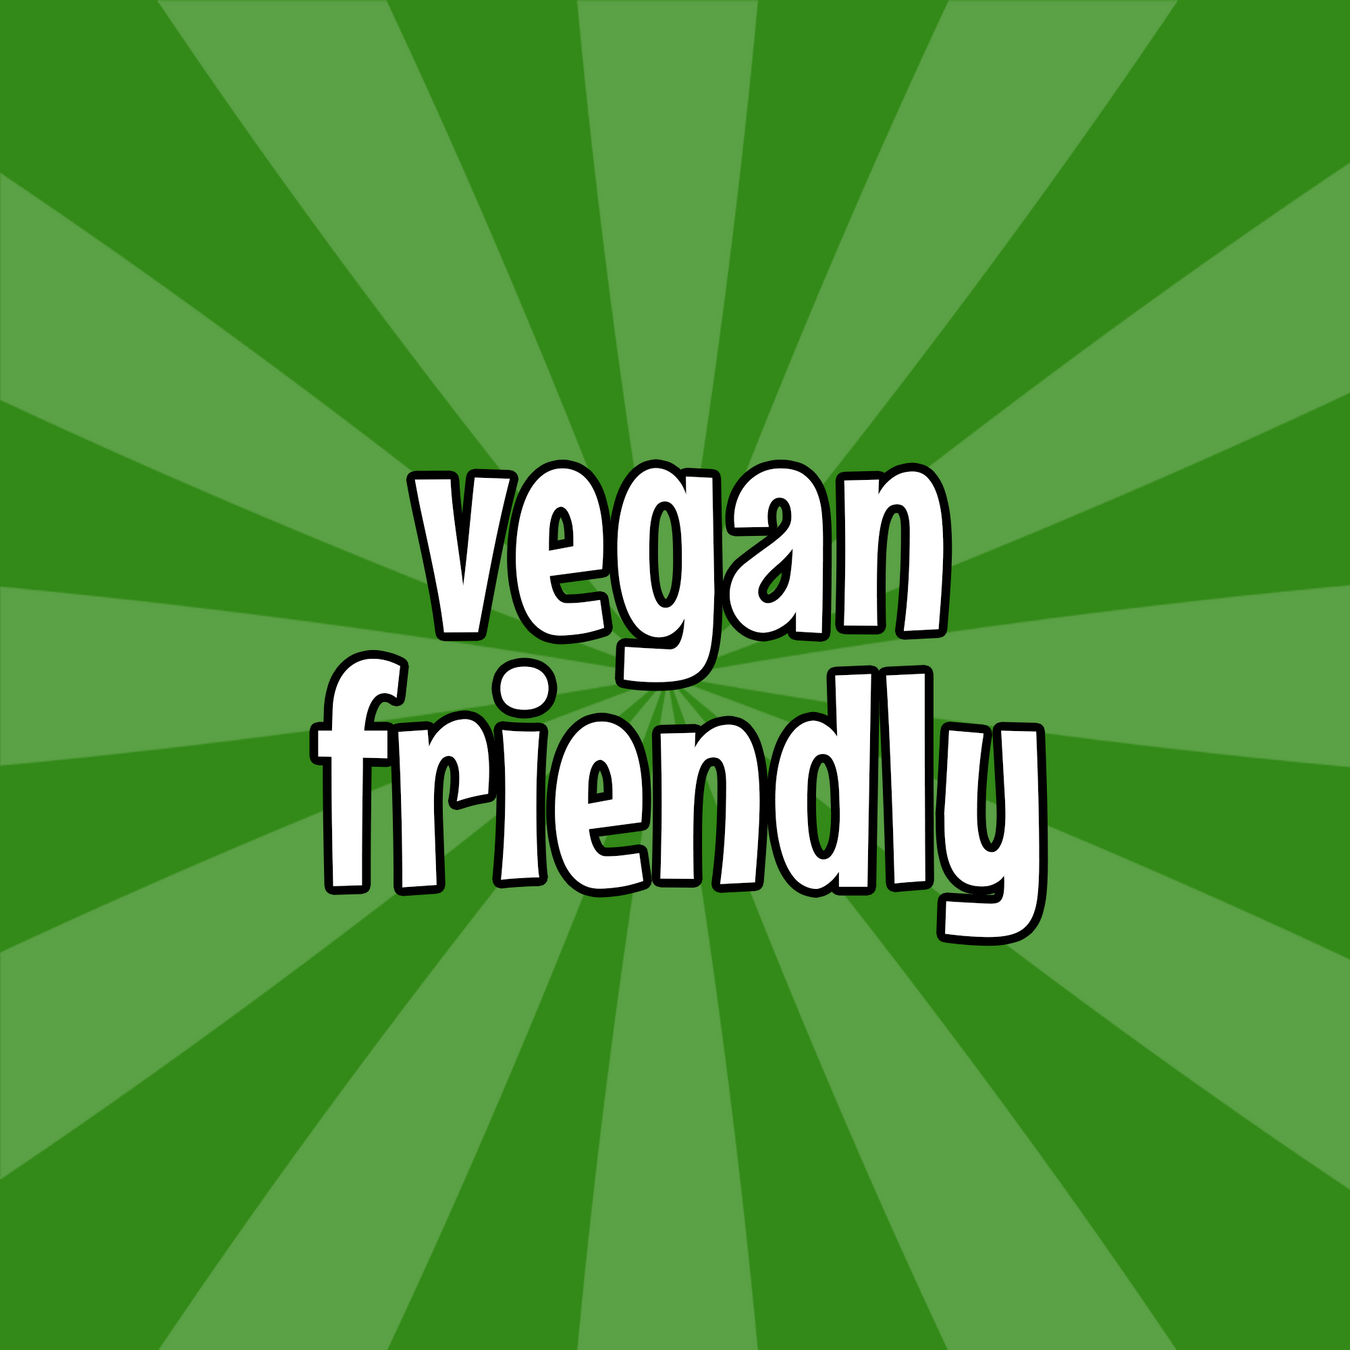 VEGAN-friendly Sugarfree, Glutenfree, Diabetic, Low Carb, Keto and Banting Products